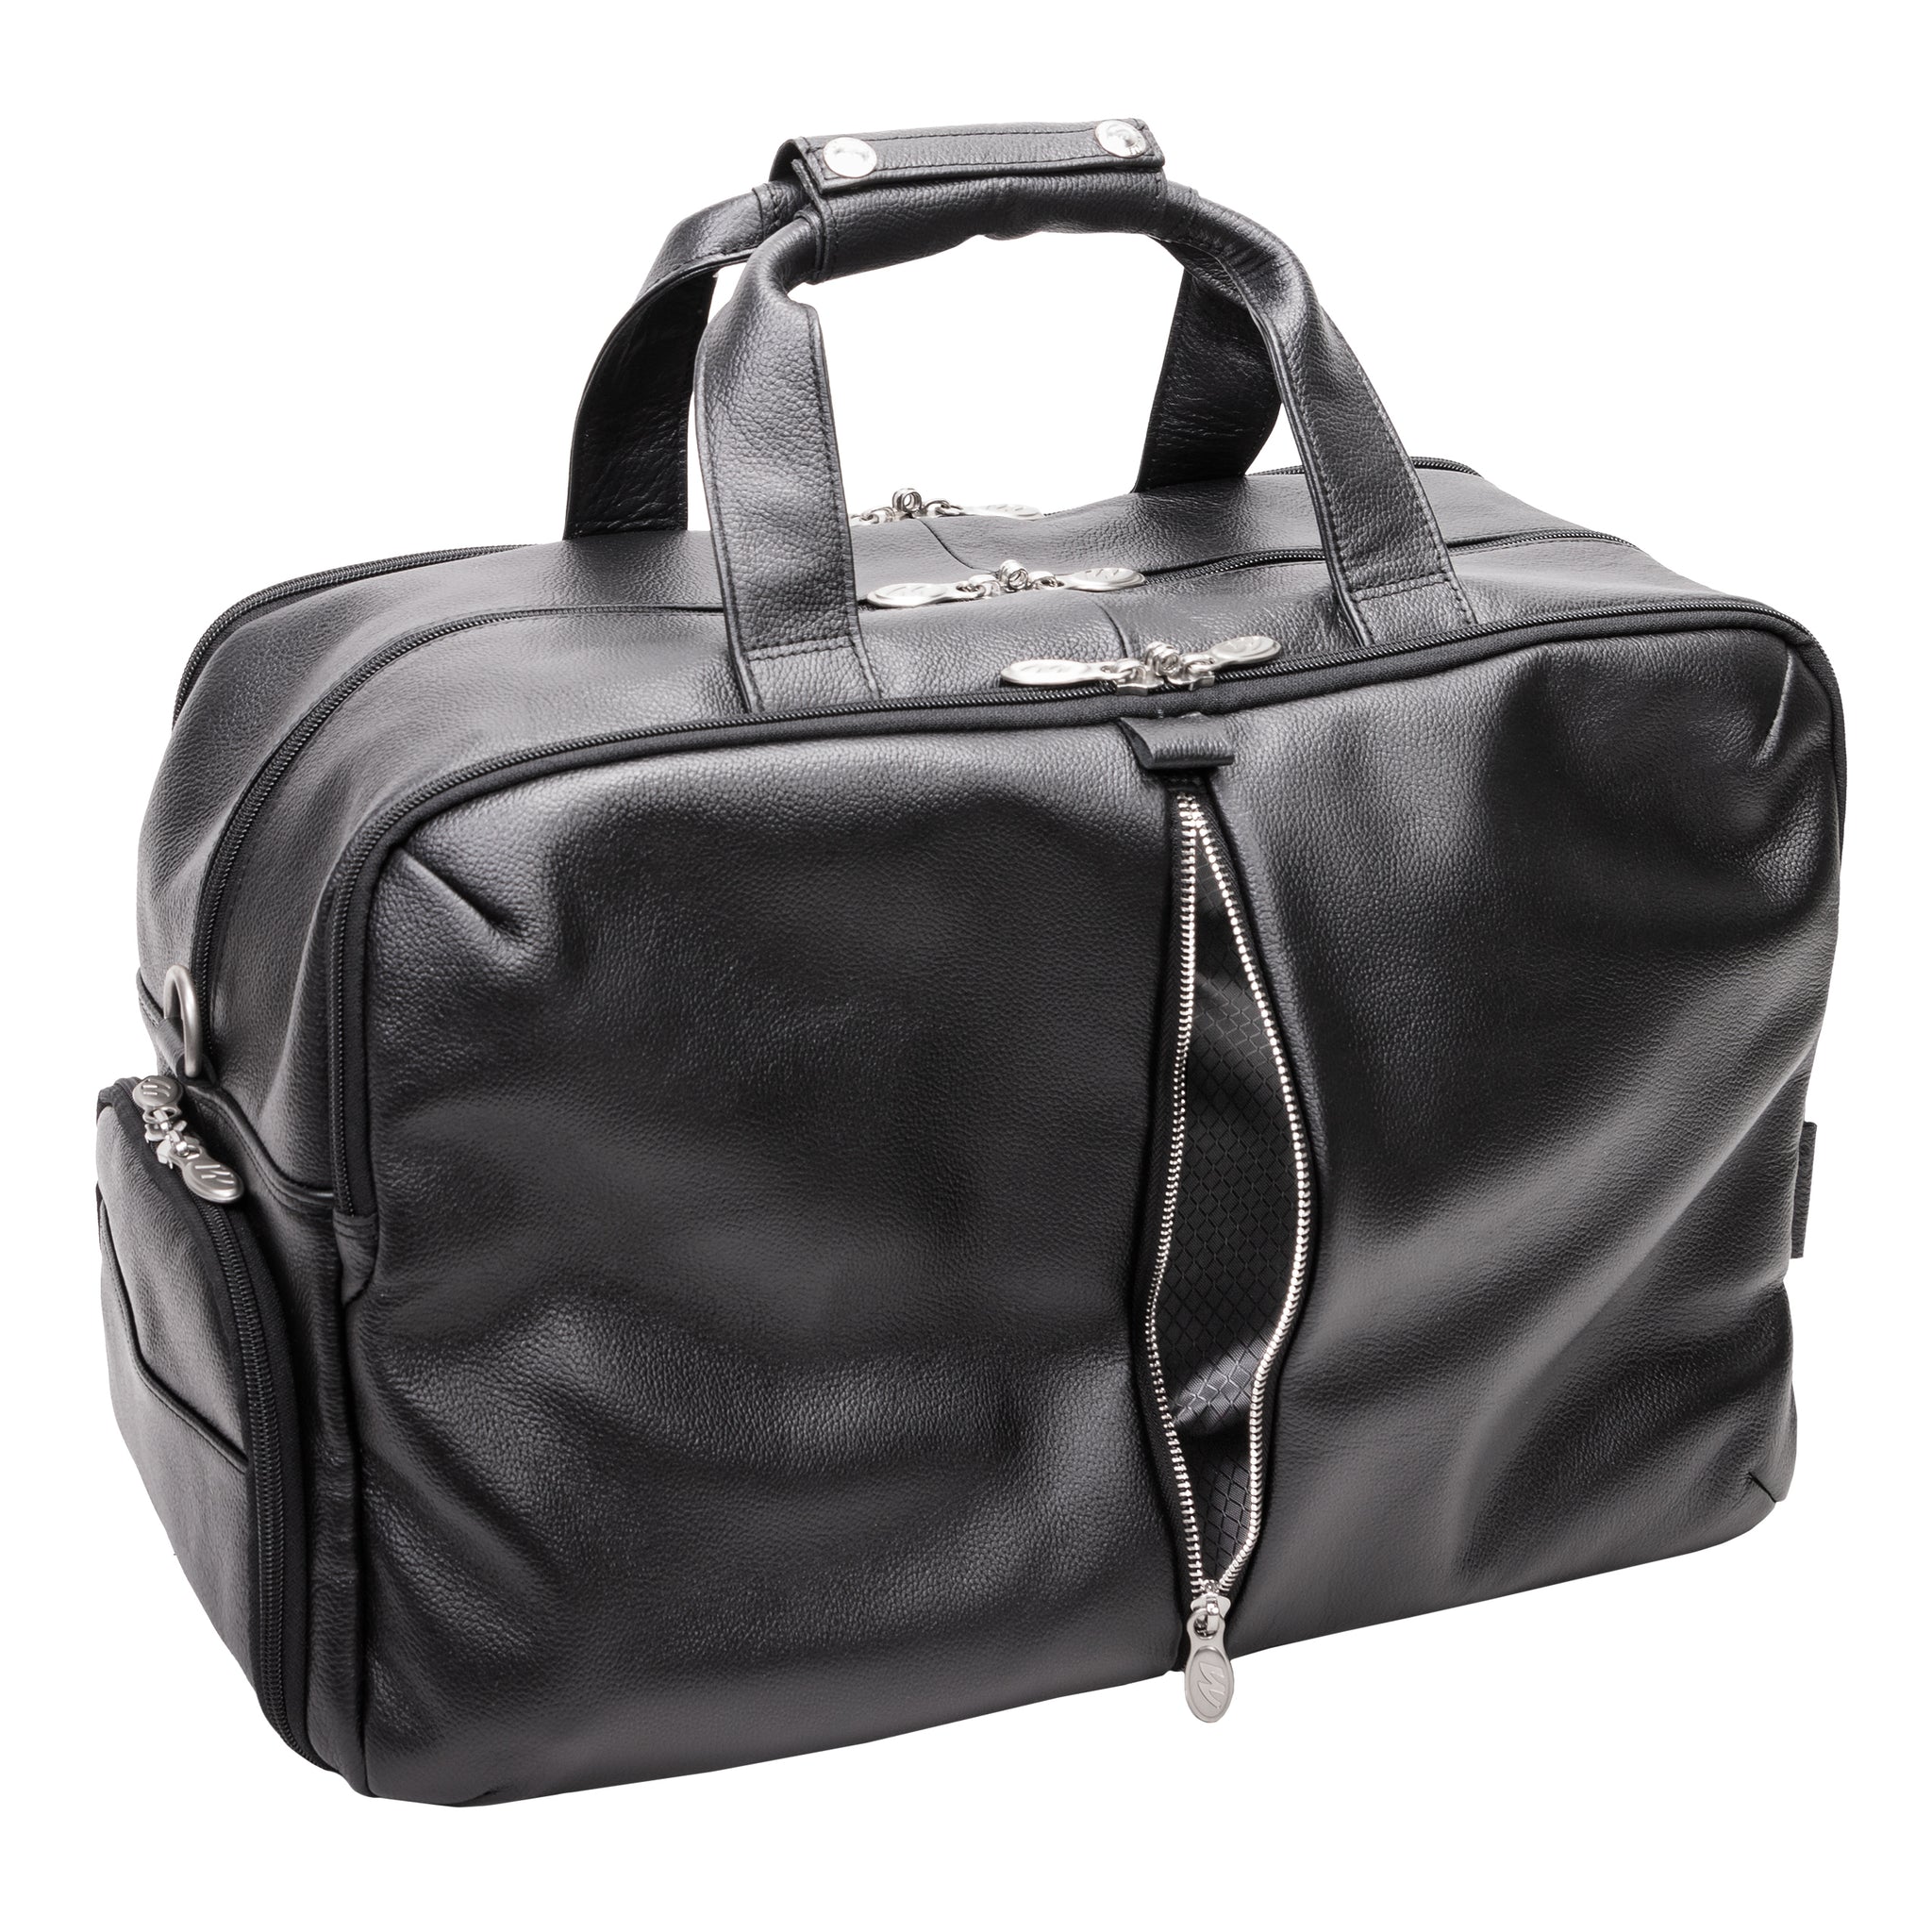 McKlein AVONDALE 19" Leather, Triple Compartment, Carry-All, Travel, Laptop Duffel